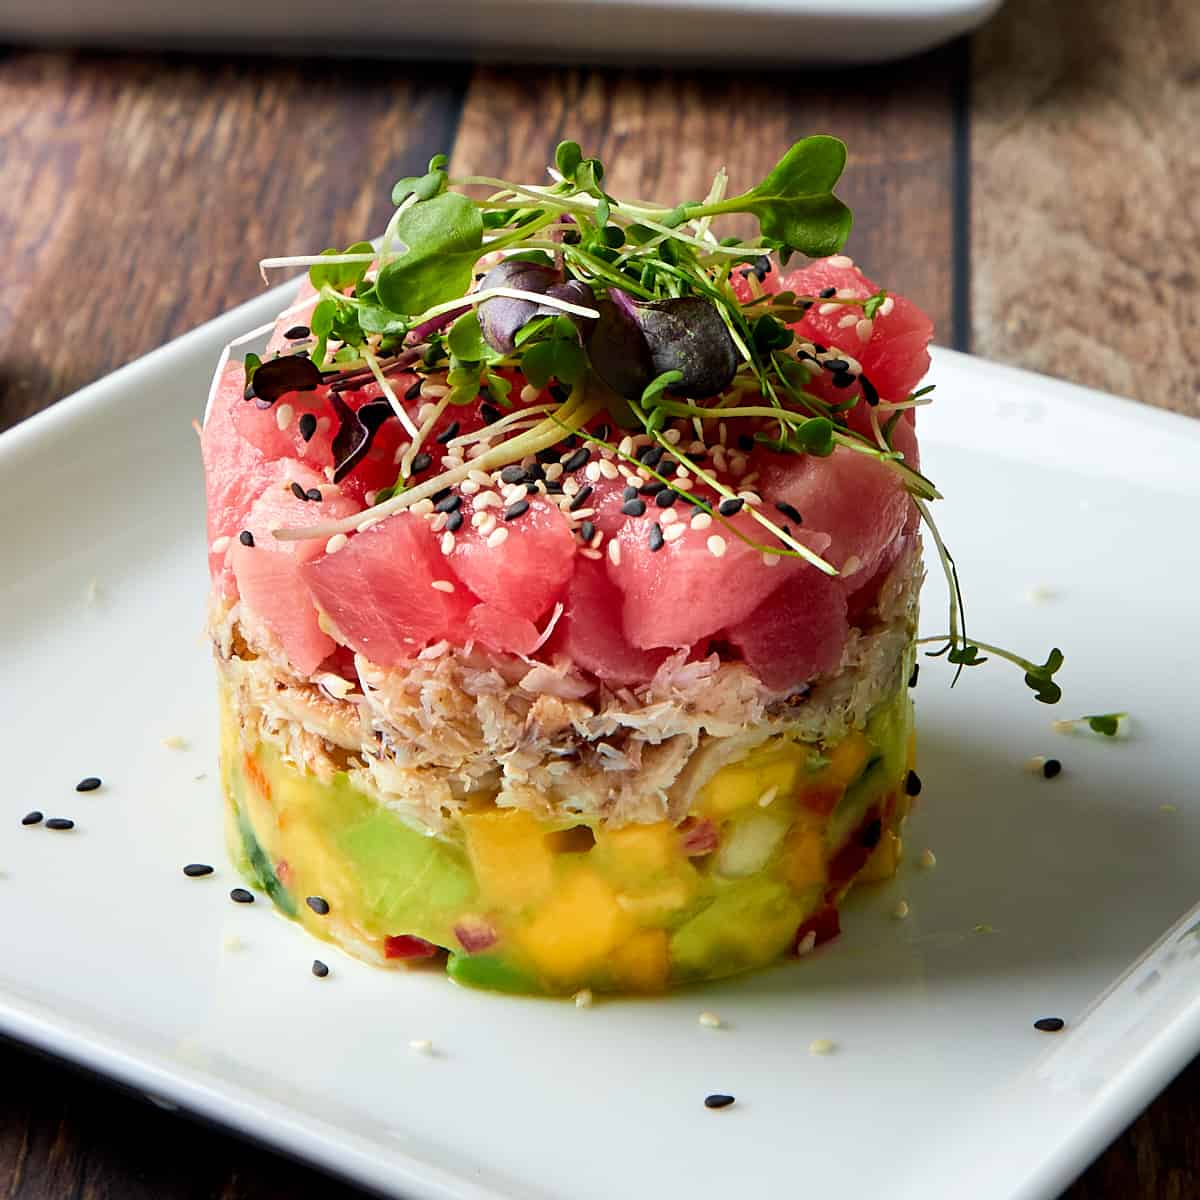 crab and ahi tuna tower on a white plate with a sprinkle of black and white sesame seeds and topped with microgreens